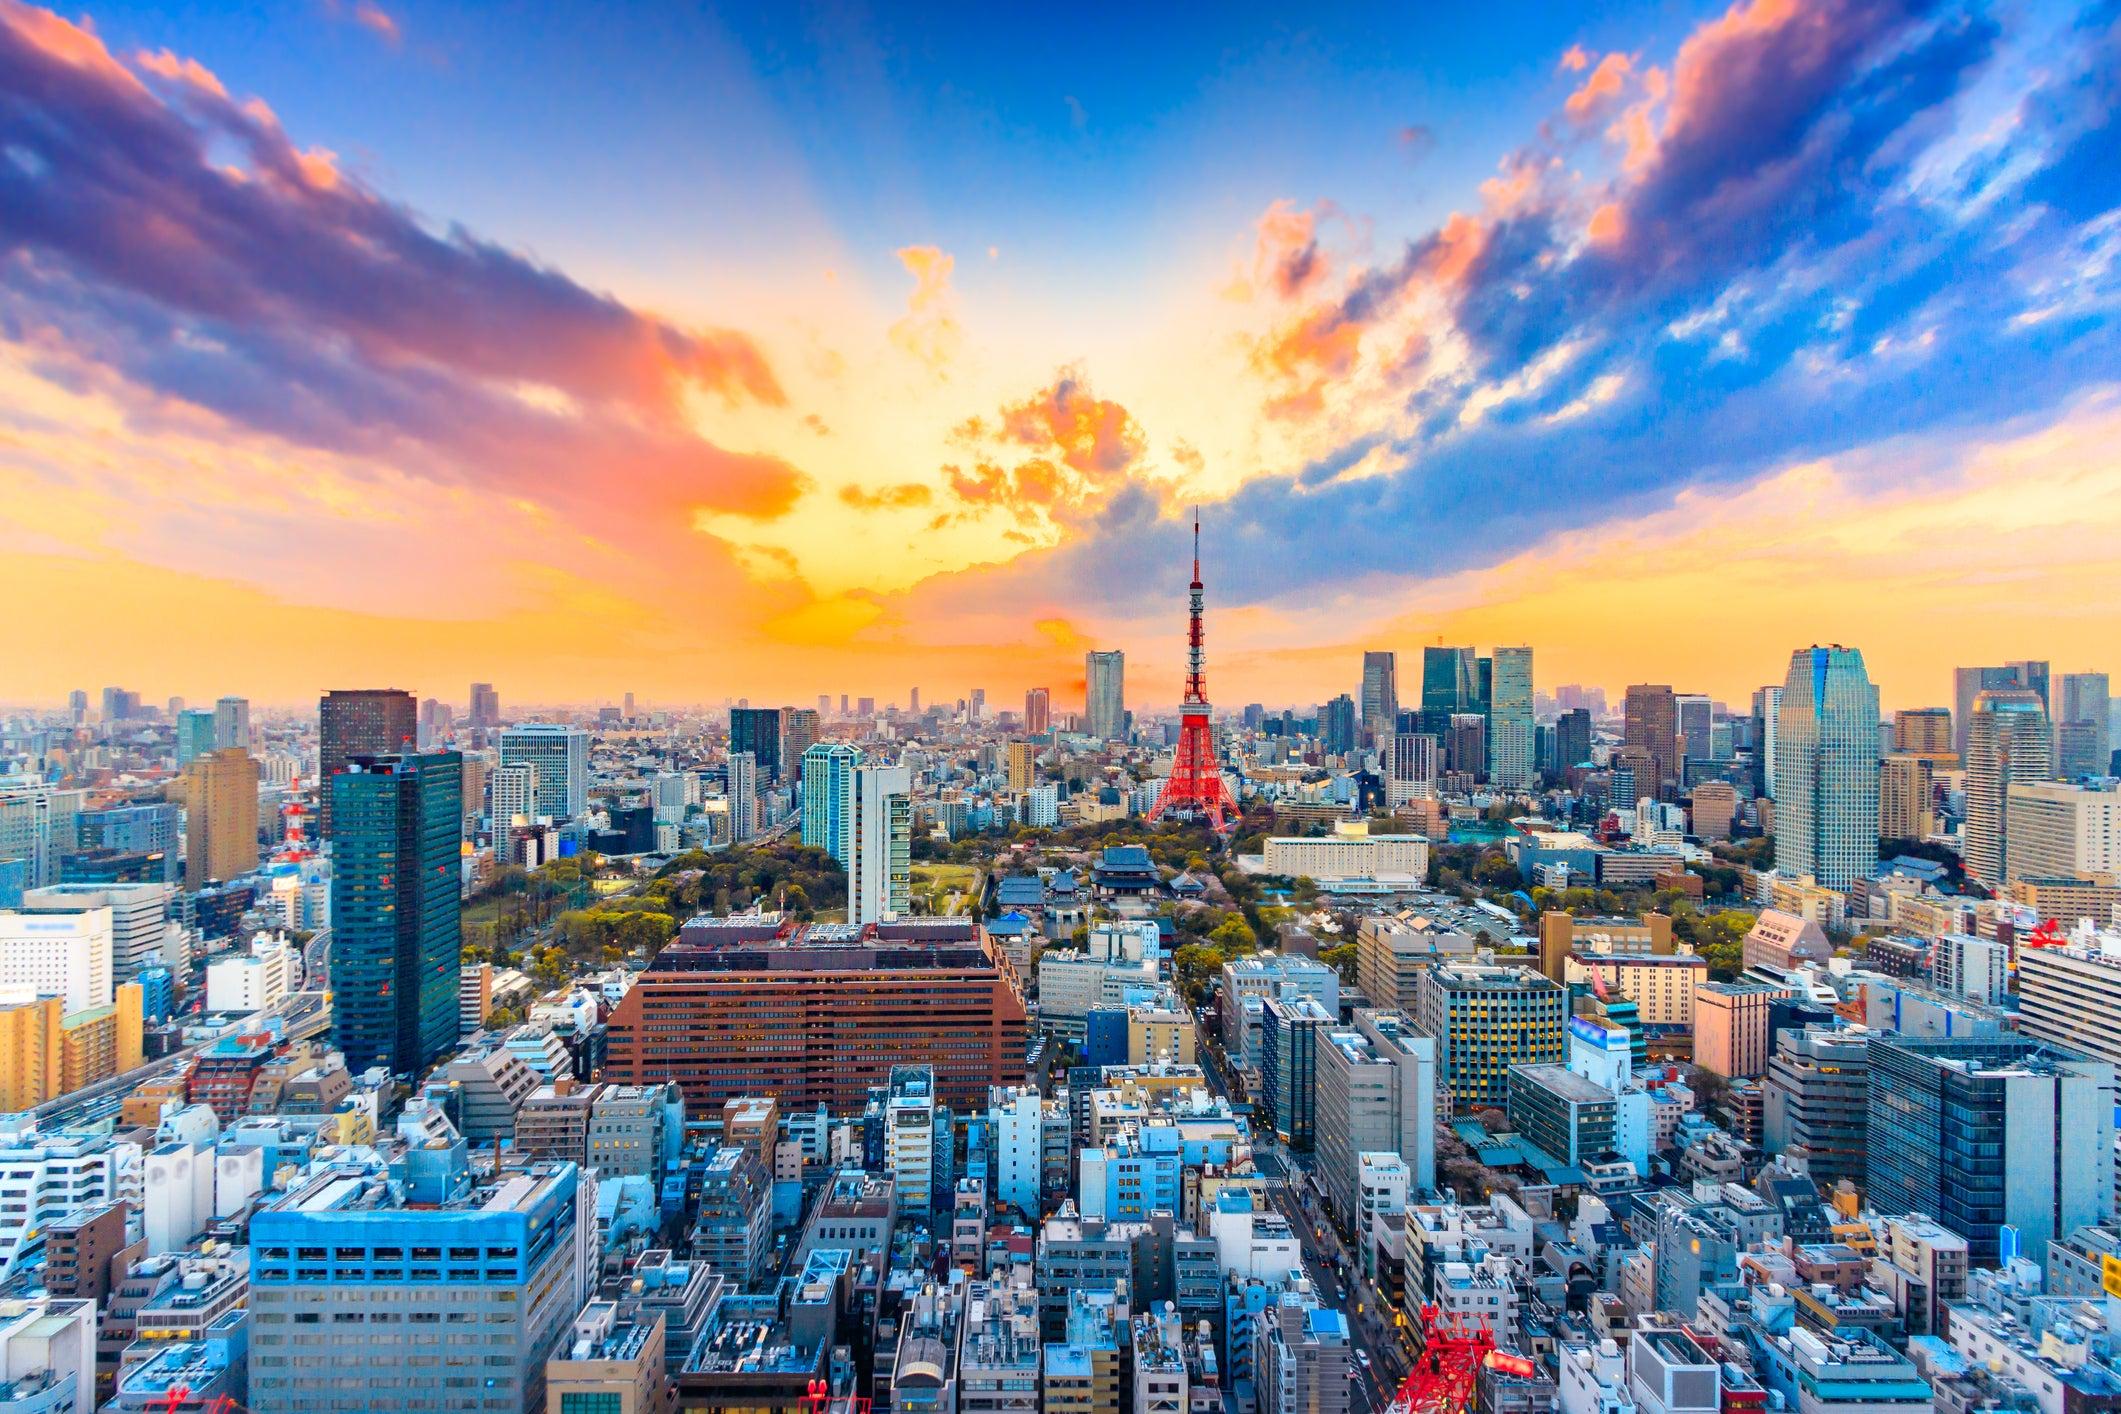 How to fly to Tokyo for £383 return